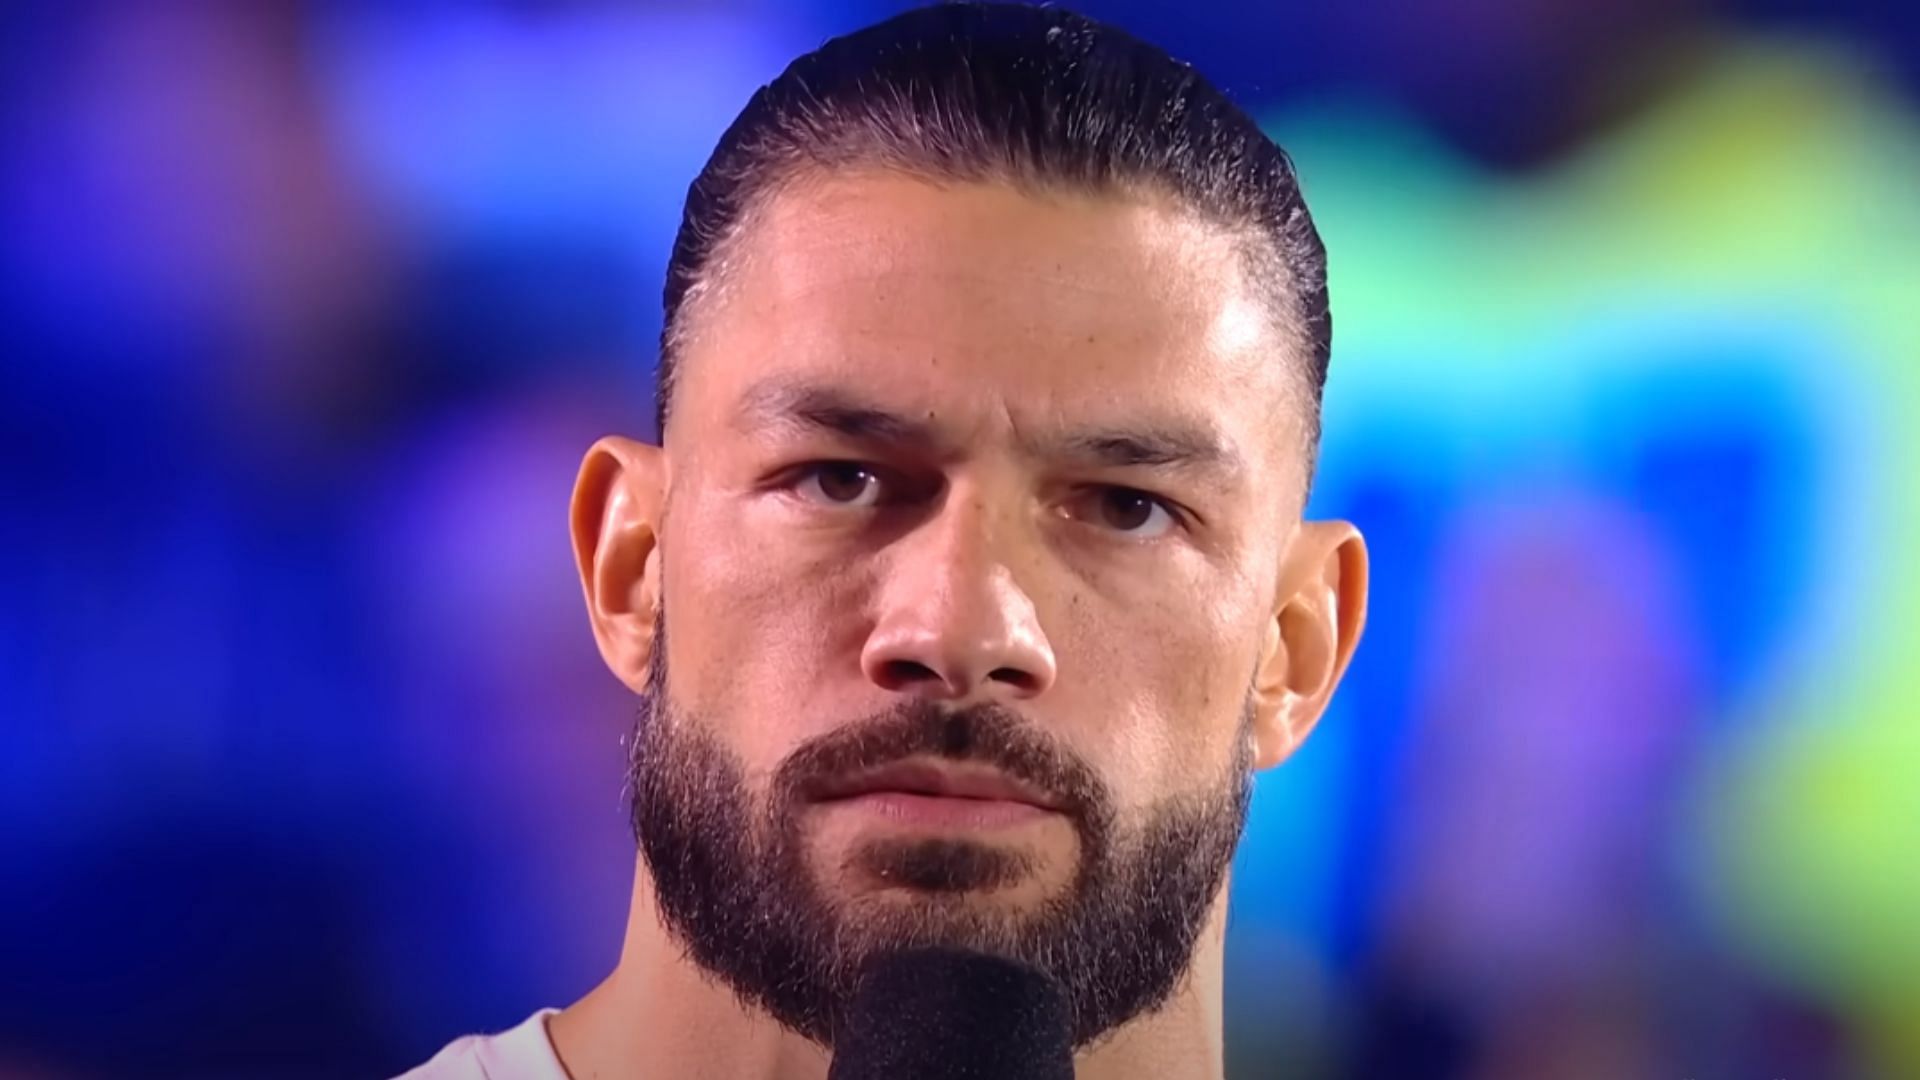 Roman Reigns joined WWE